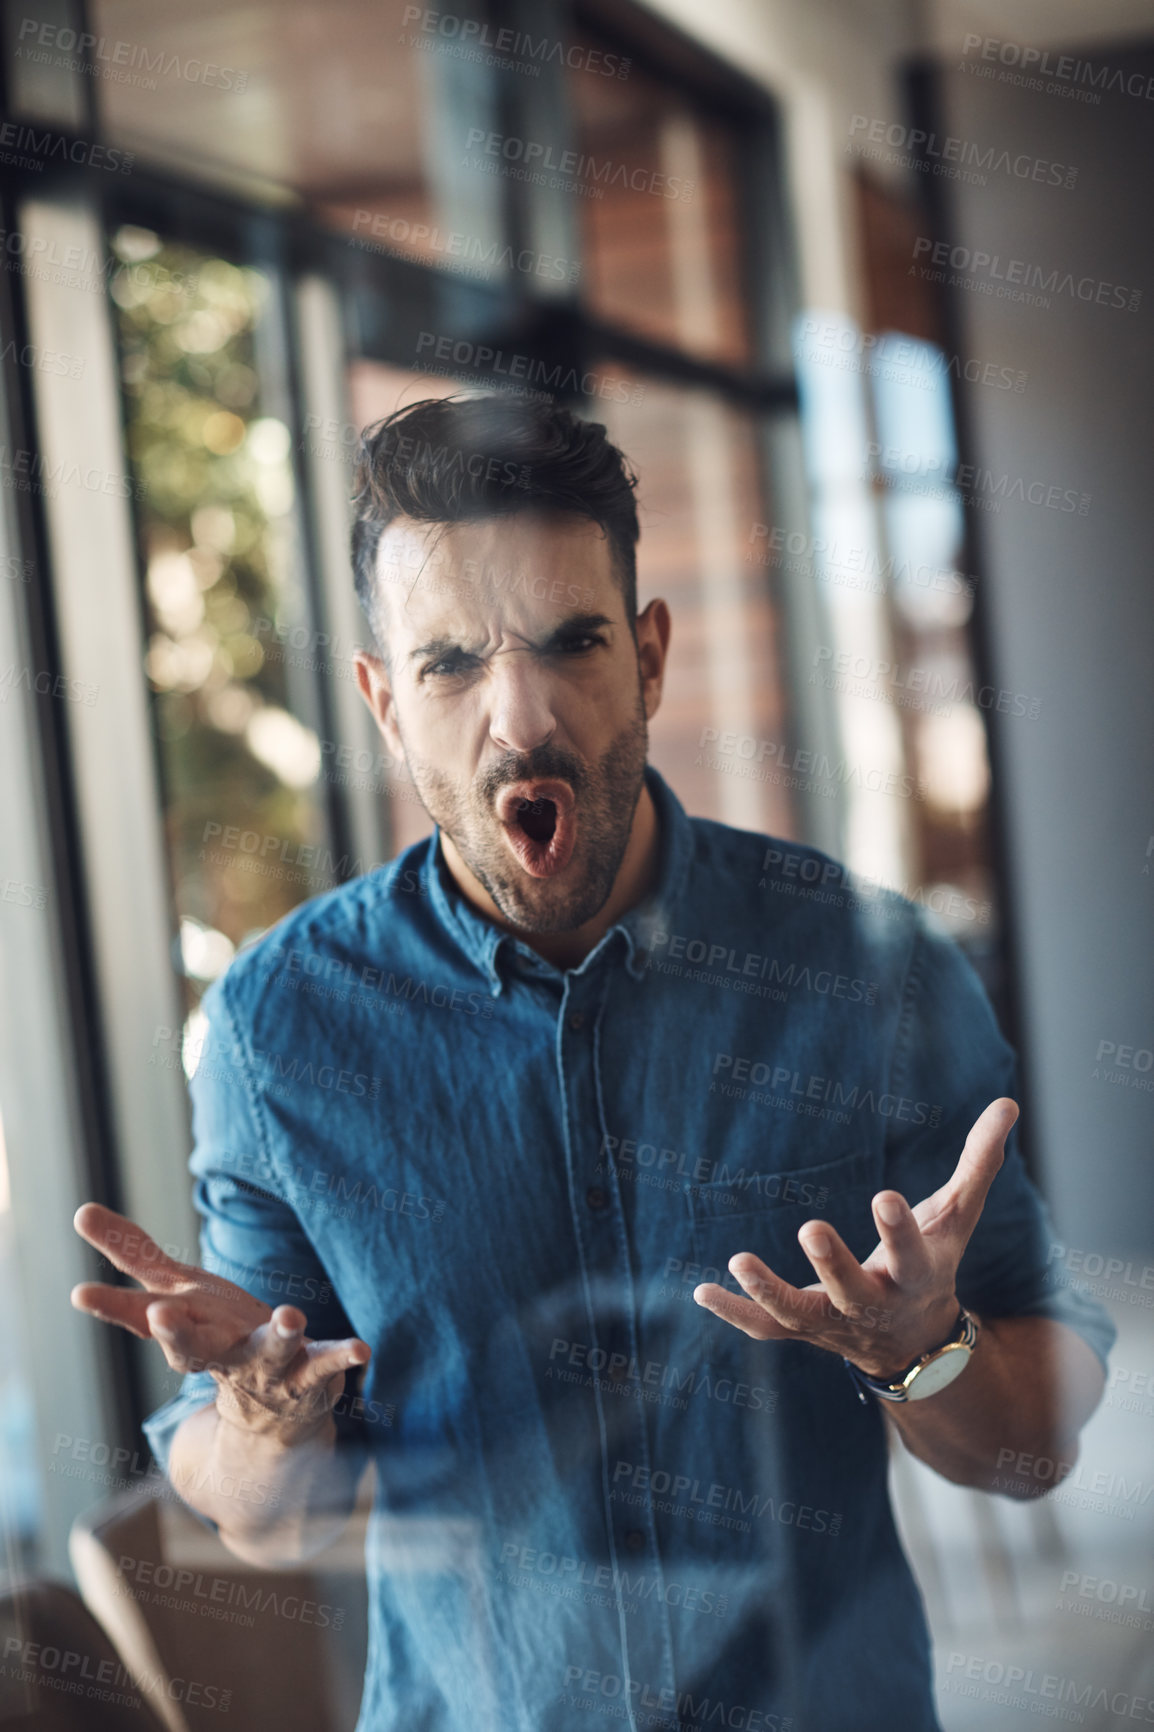 Buy stock photo Angry, stressed and frustrated man unhappy and feeling bad about work problems while standing in a modern office alone. Aggressive, annoyed and upset young male filled with emotions screaming loud

